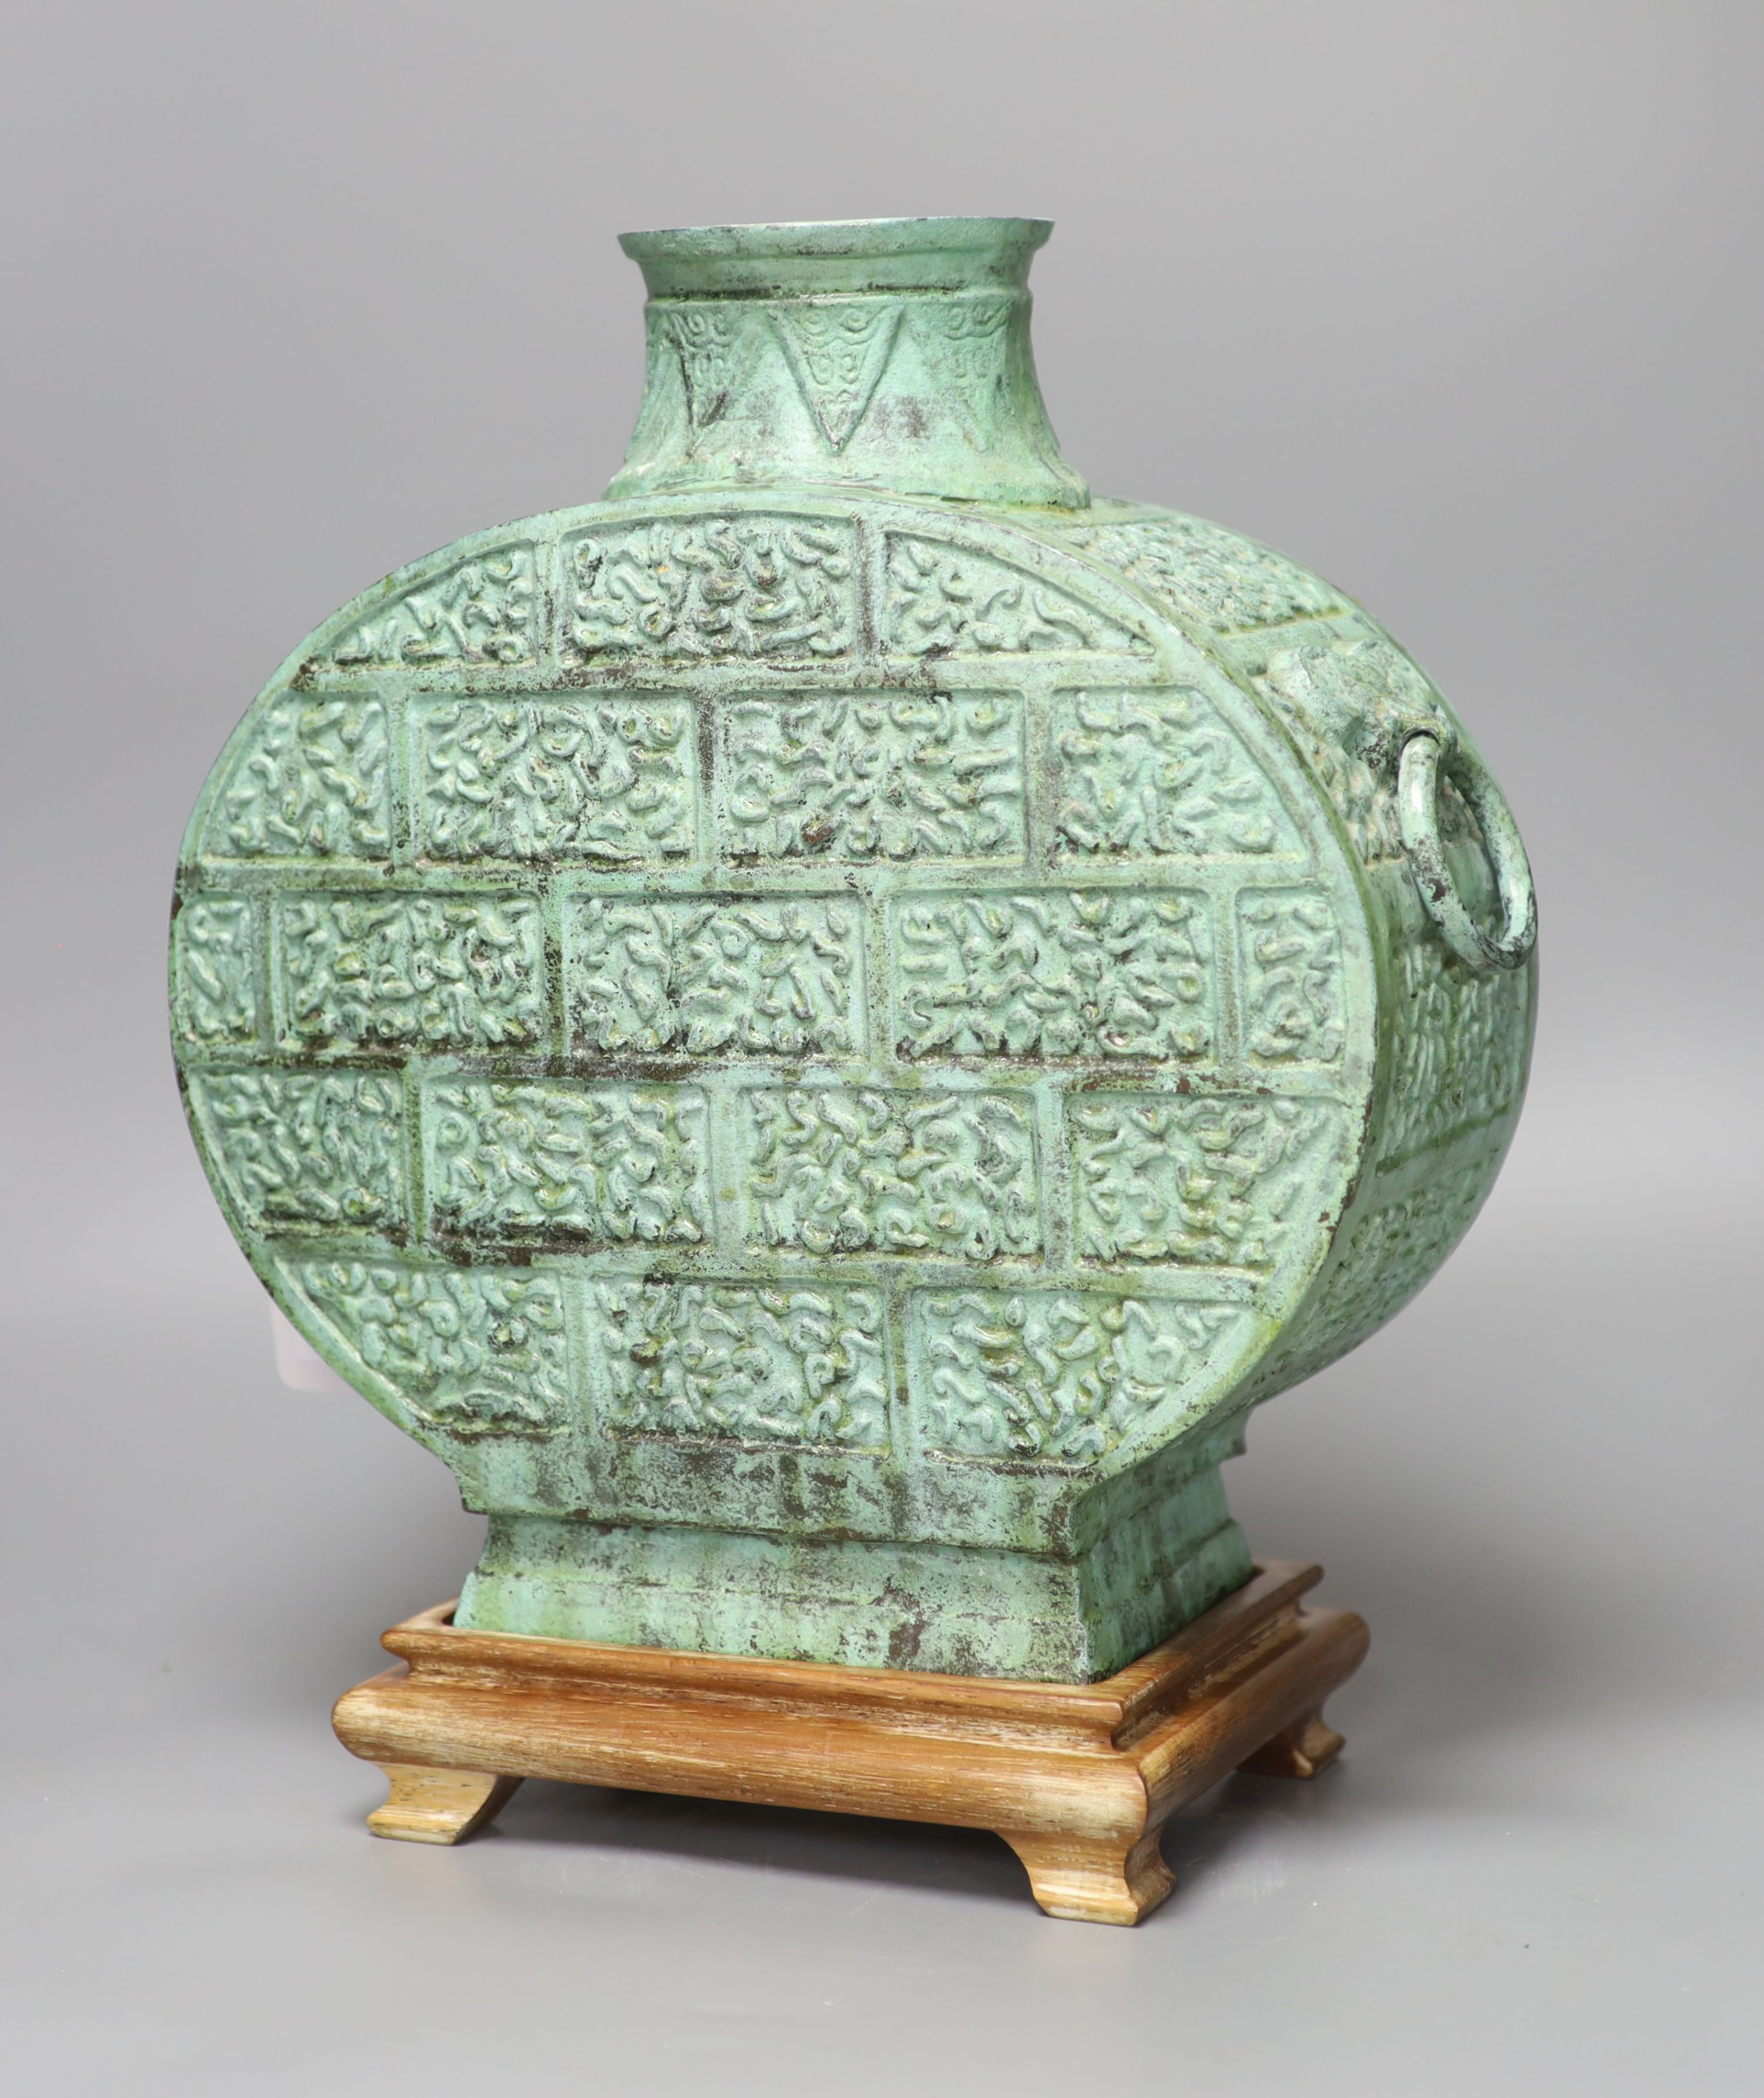 A large Chinese archaistic bronze vessel, bianhu, late 20th century